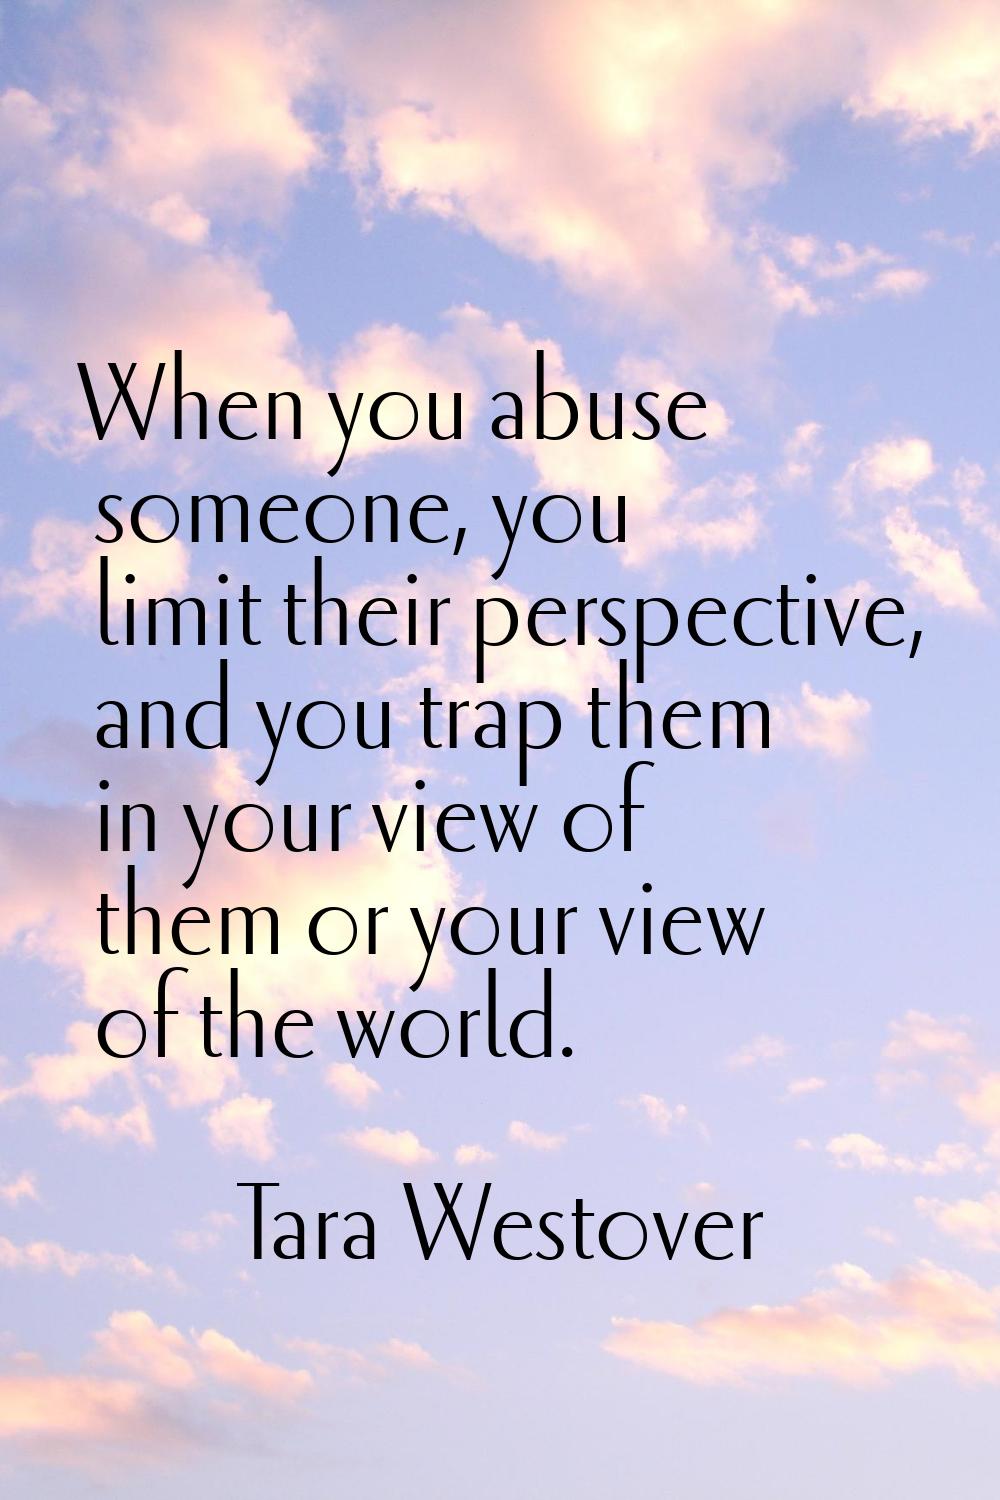 When you abuse someone, you limit their perspective, and you trap them in your view of them or your